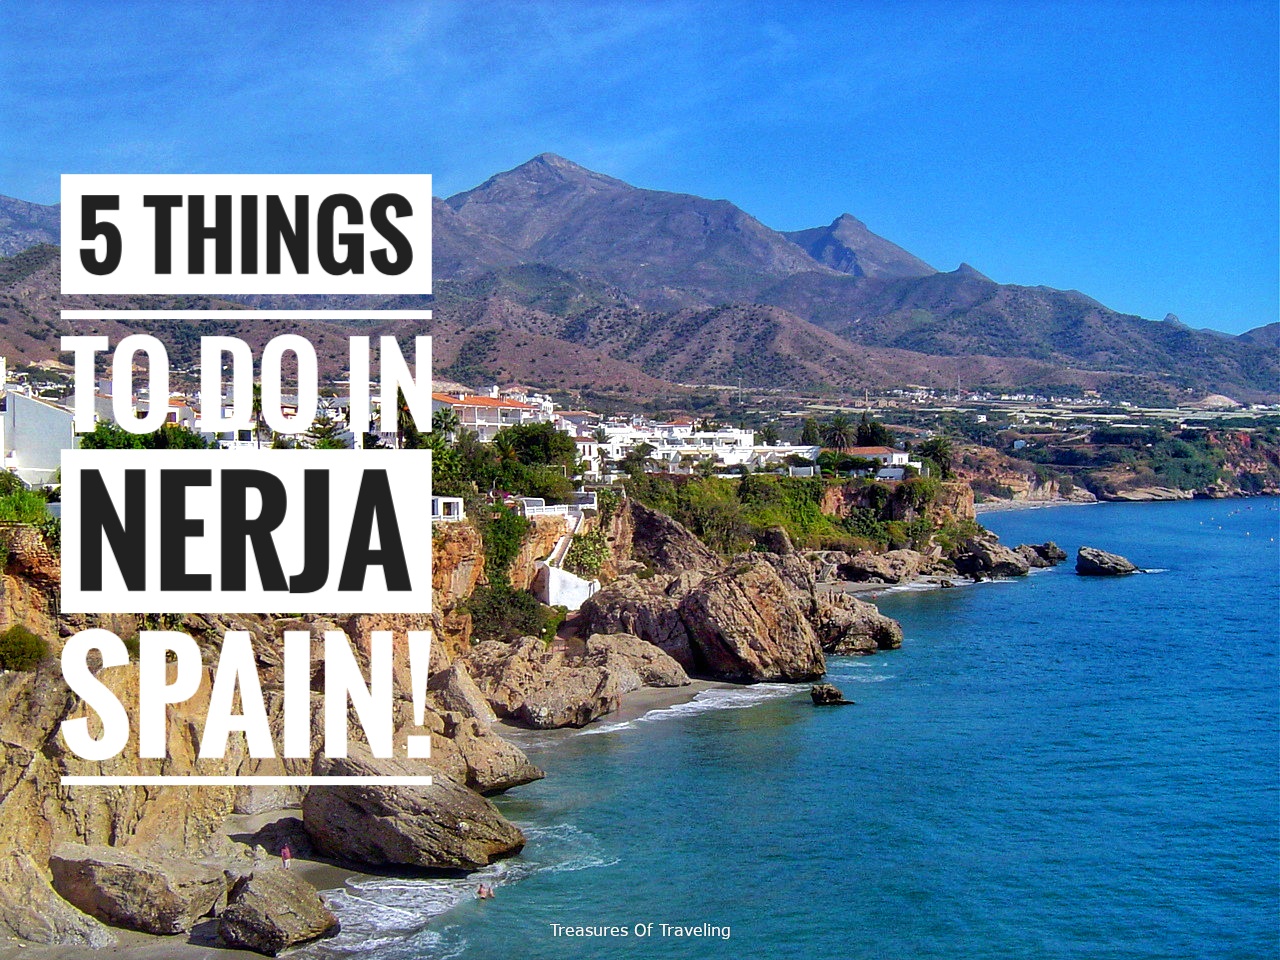 The Best Coastal Towns in Costa del Sol Spain